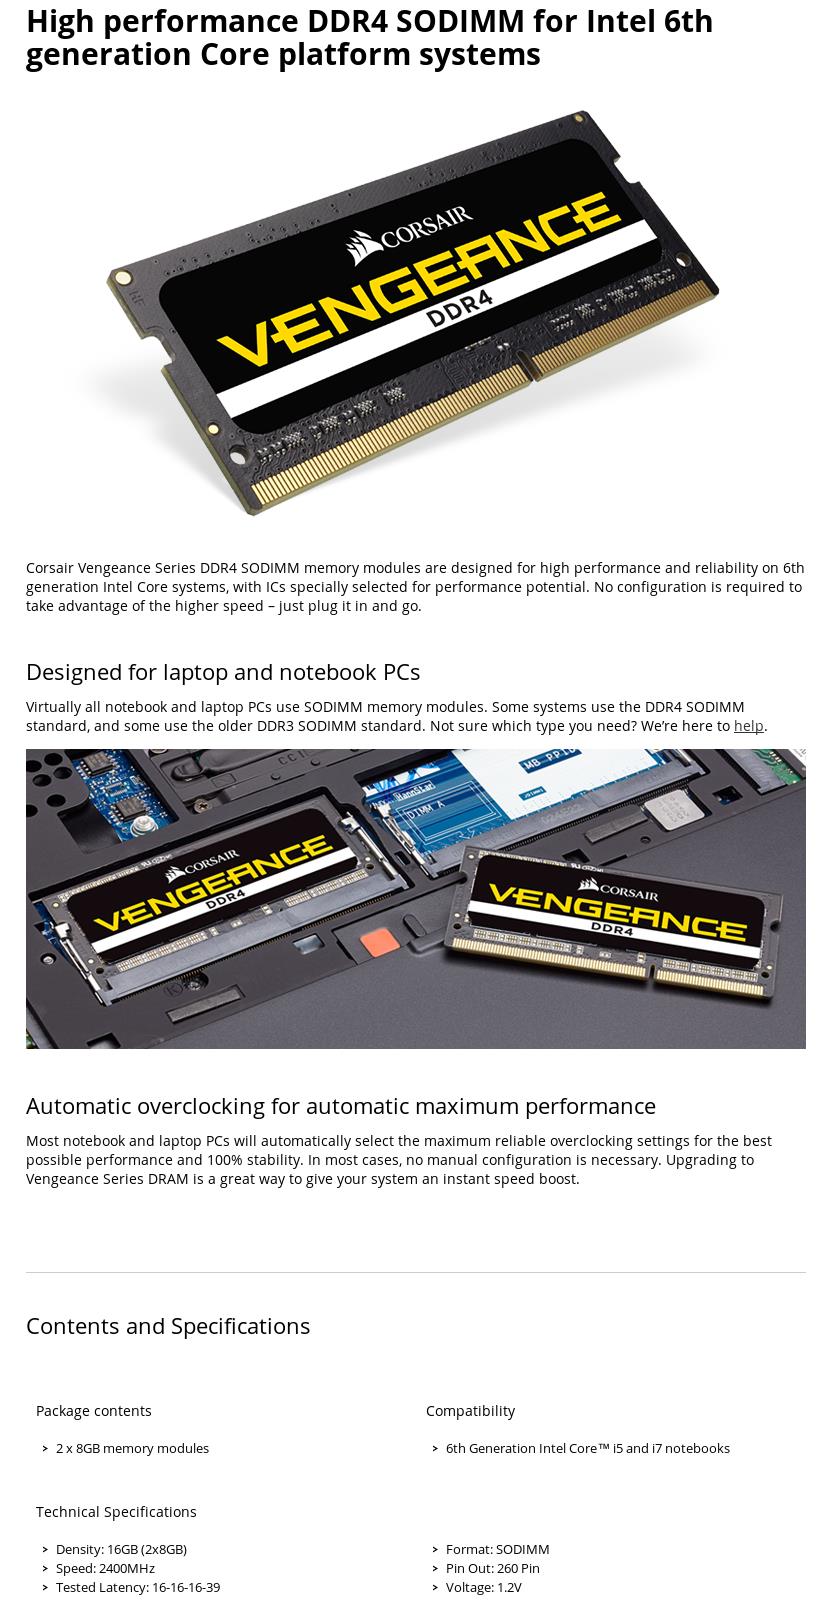 A large marketing image providing additional information about the product Corsair 16GB Kit (2x8GB) DDR4 Vengeance SODIMM C16 2400MHz - Additional alt info not provided